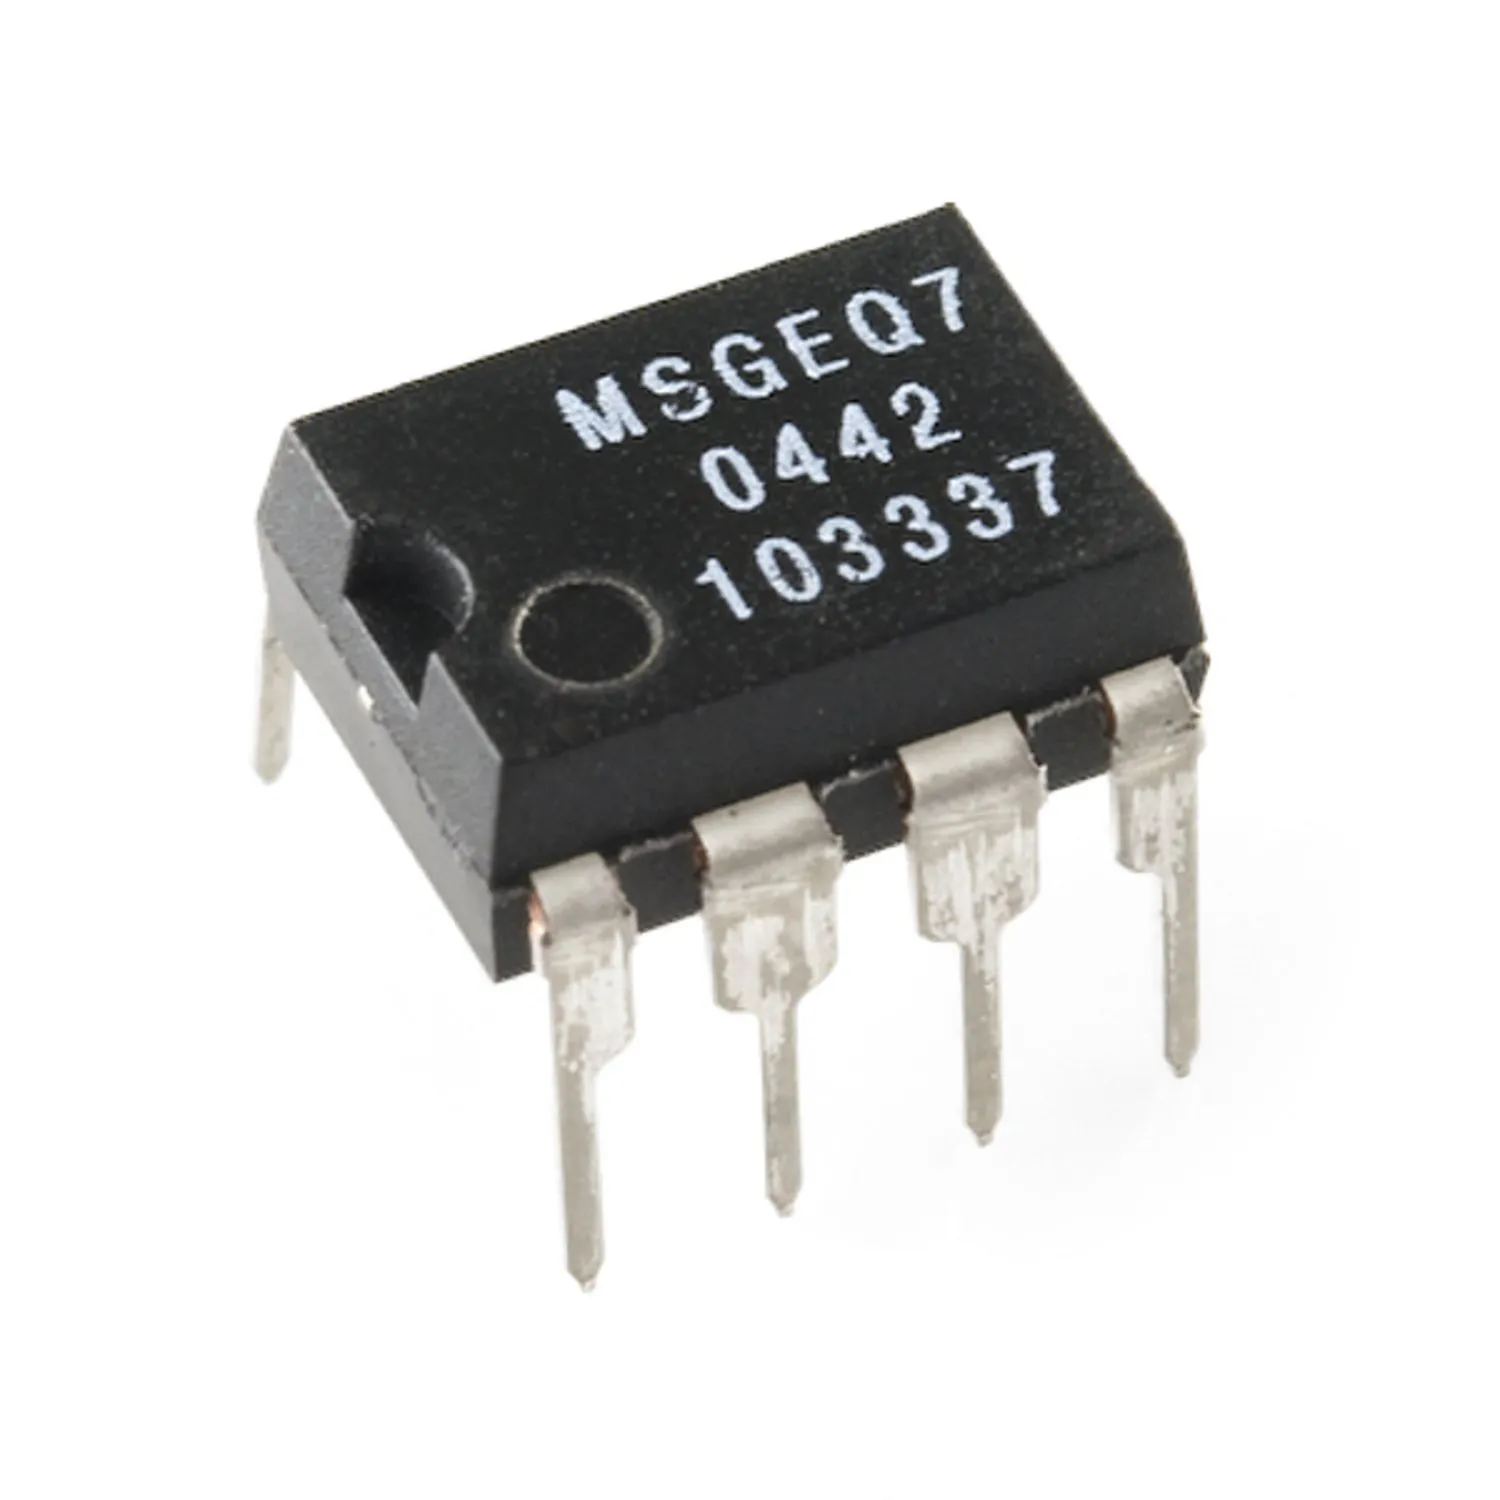 Photo of Graphic Equalizer Display Filter - MSGEQ7